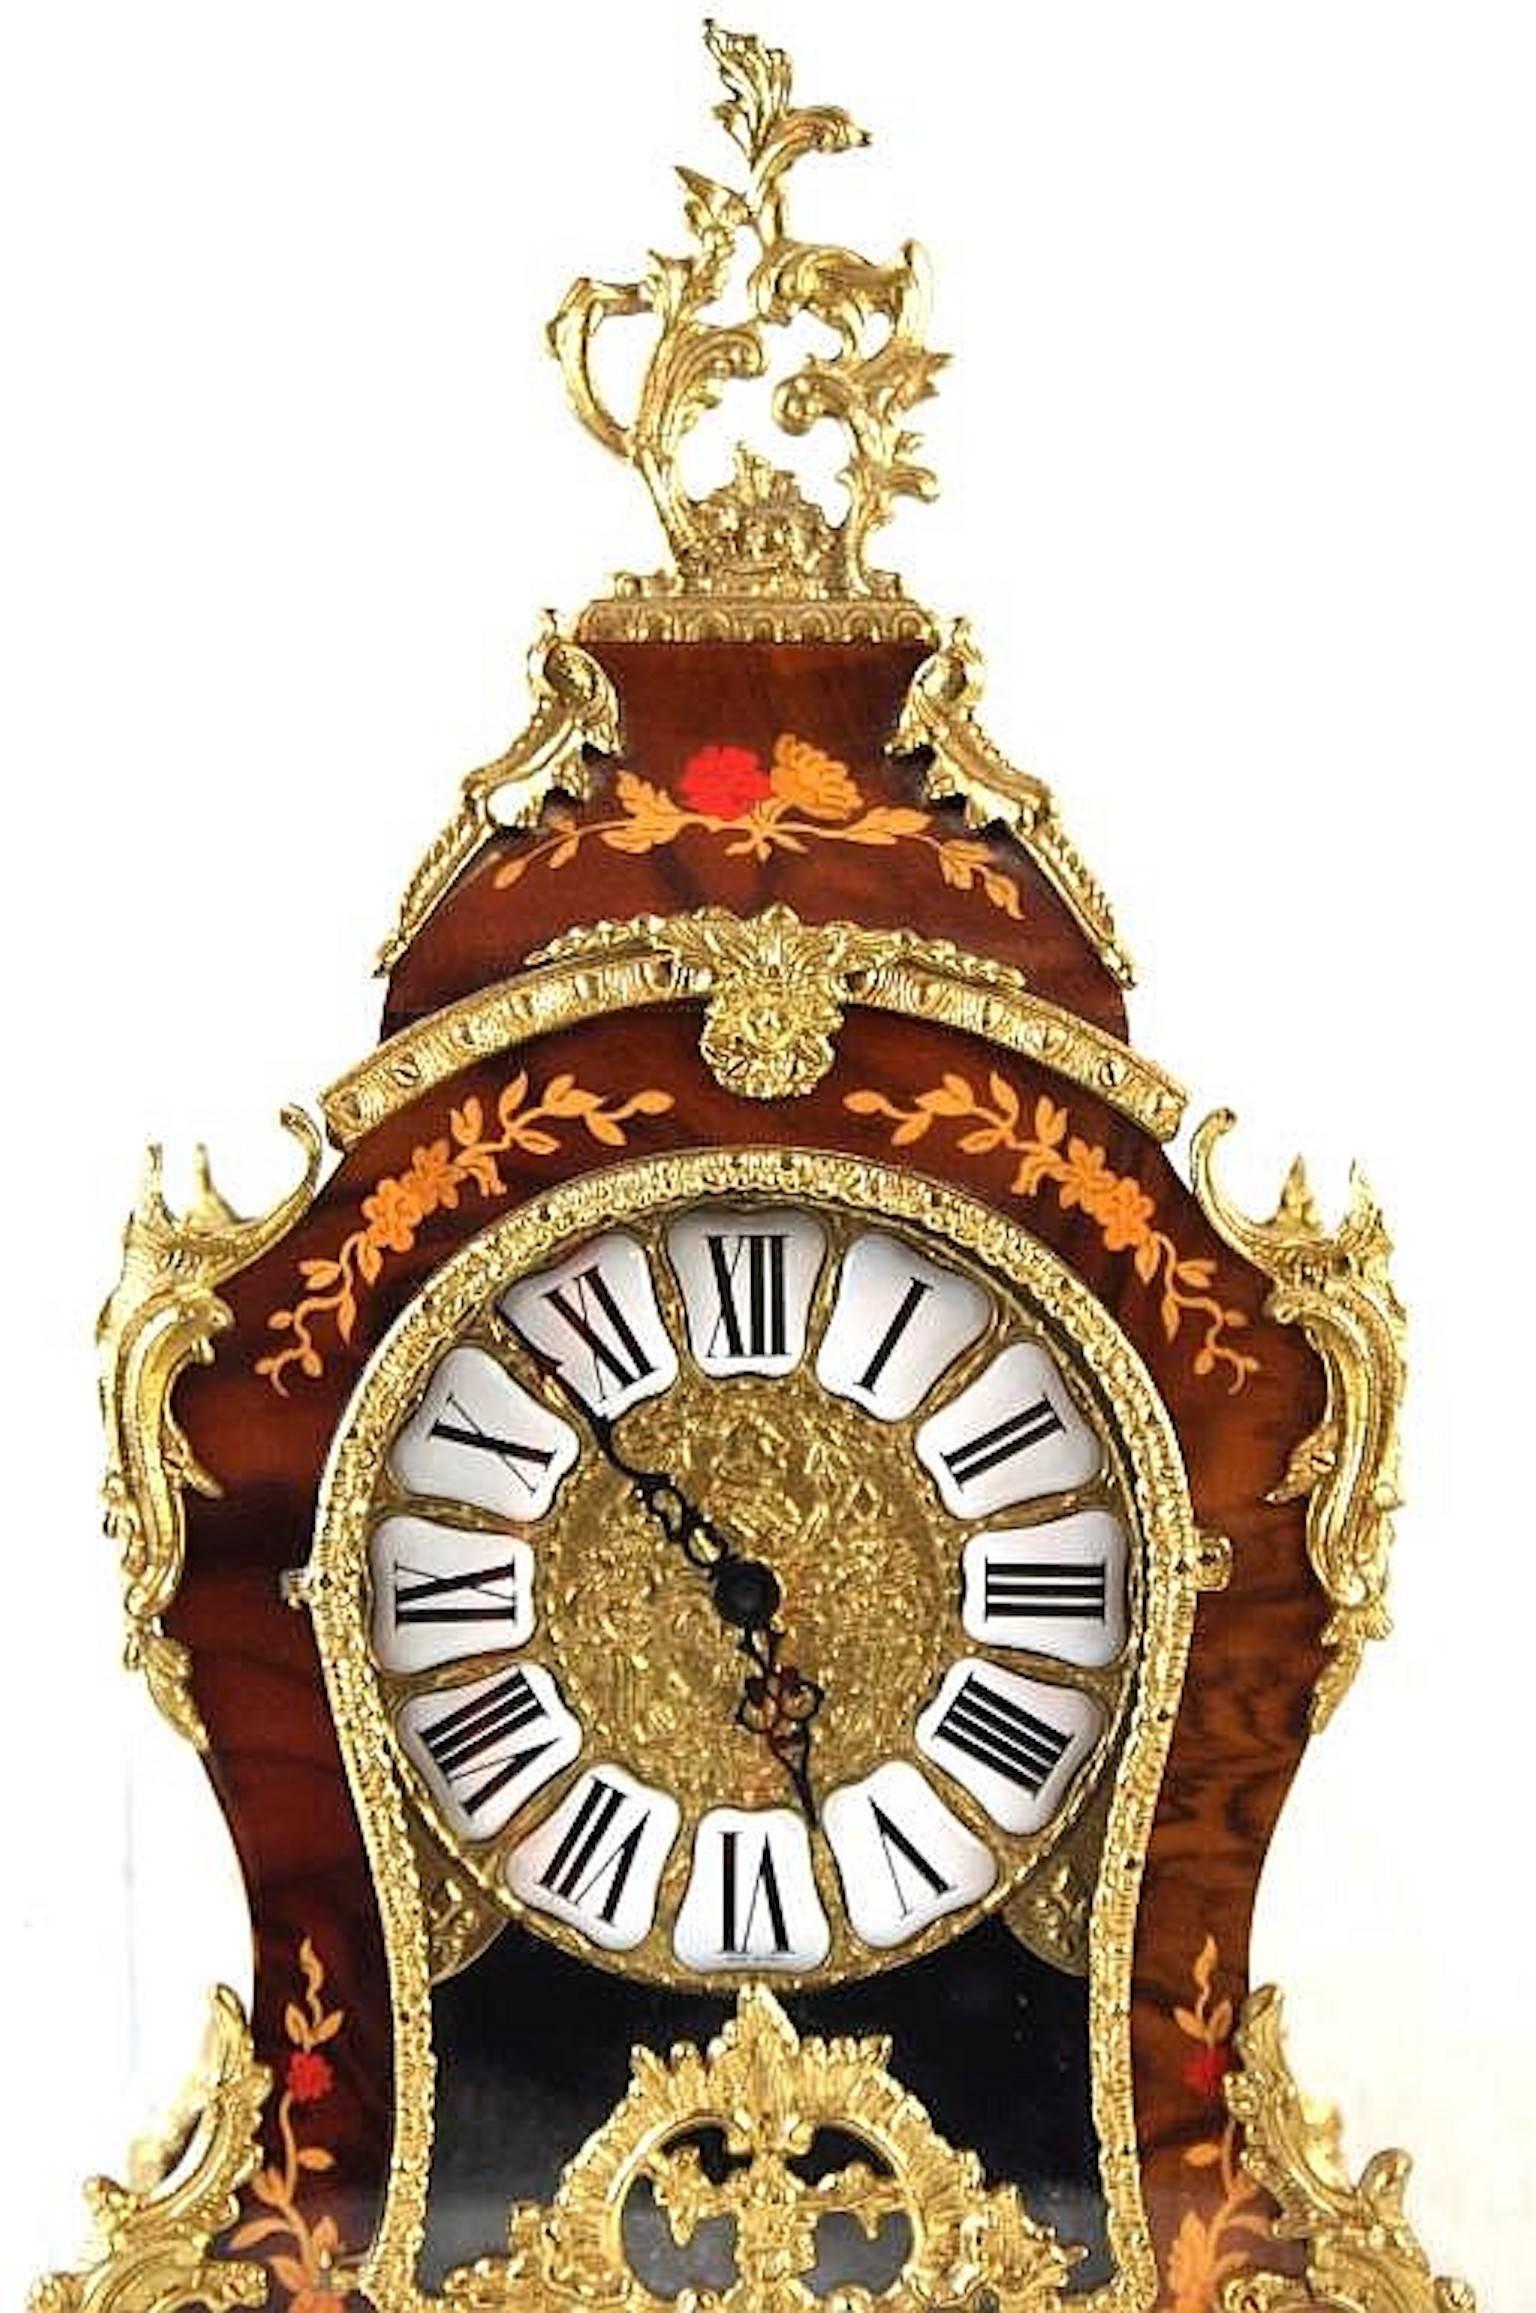 Fine French gilt bronze and inlaid clock with enameled numbers. Antique replica, good condition, battery wind.